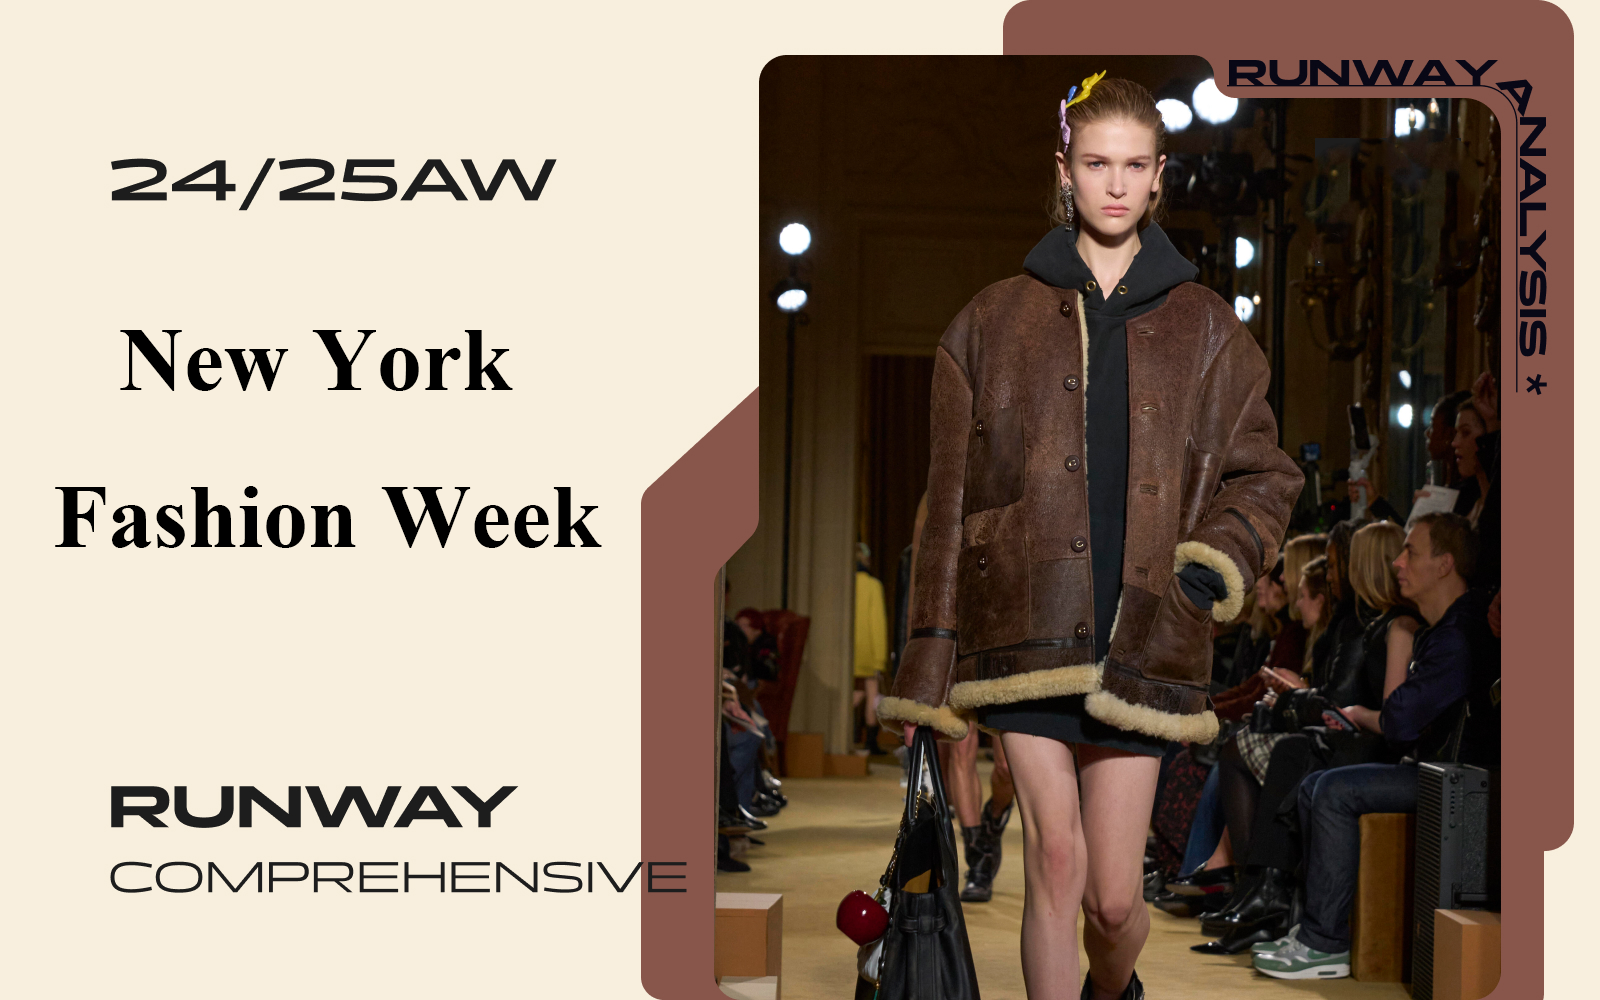 New York Fashion Week -- Recommended Womenswear Brands